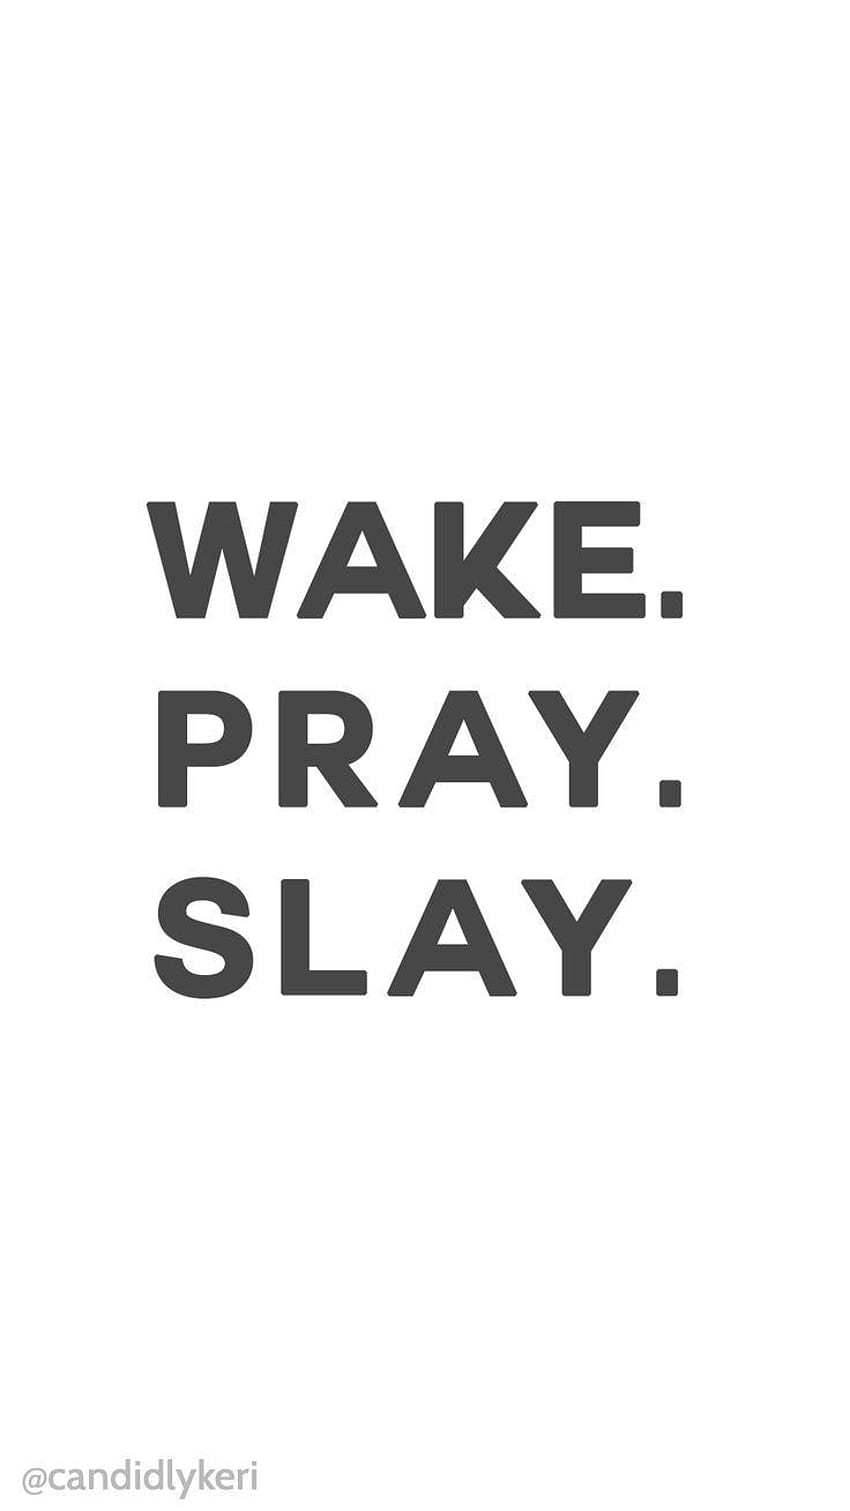 Wake Pray Slay quote motivation backgrounds you can, pray for the ...